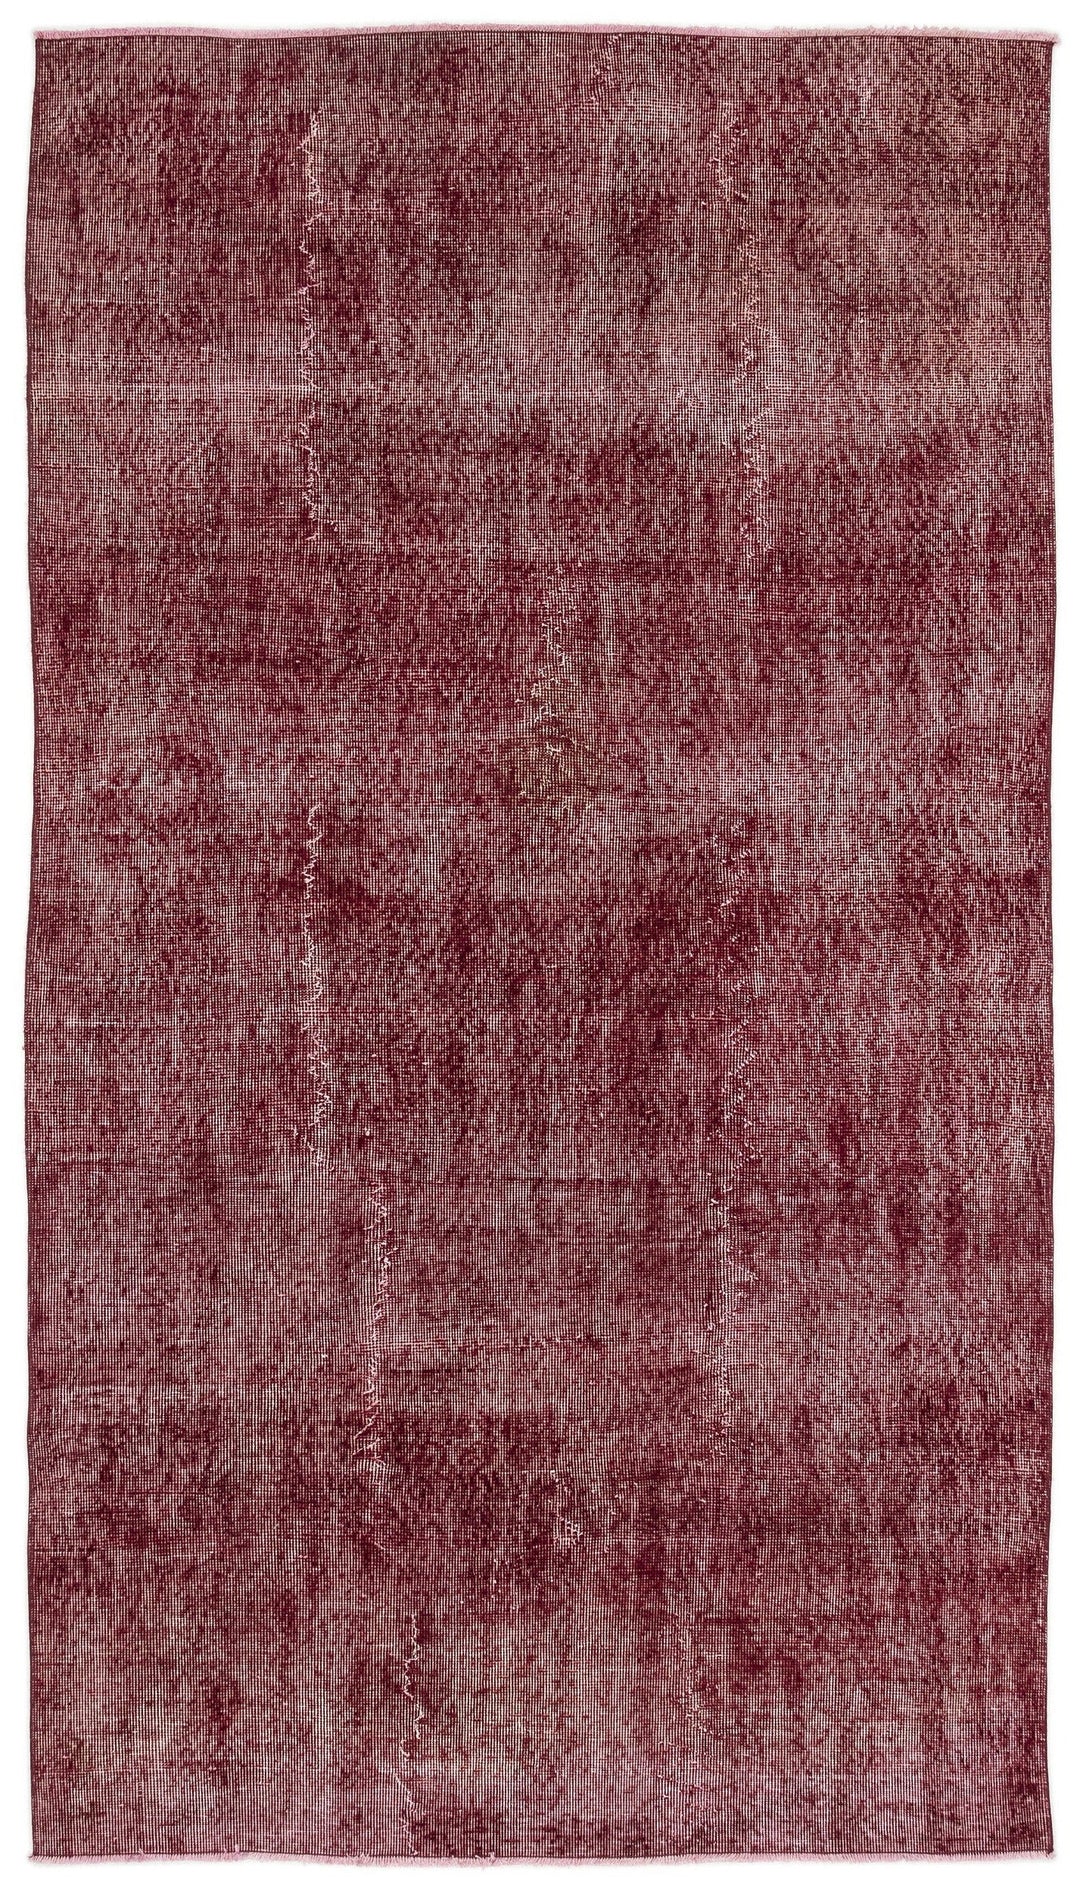 Athens Red Tumbled Wool Hand Woven Carpet 143 x 255